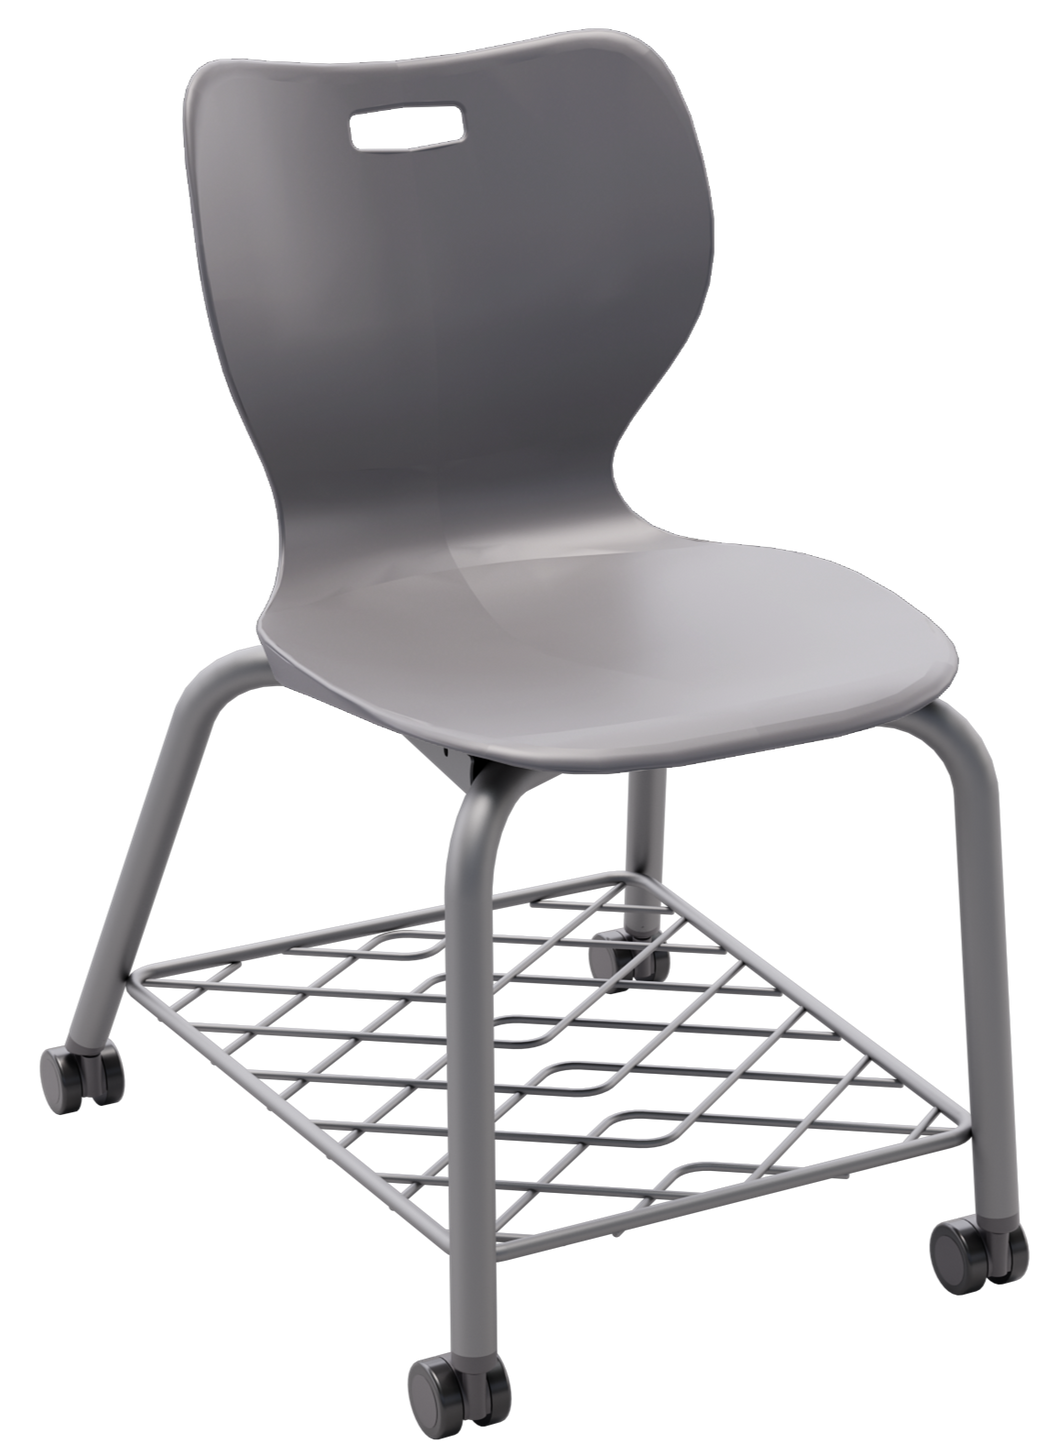 Four Leg Caster Chair with Bookrack